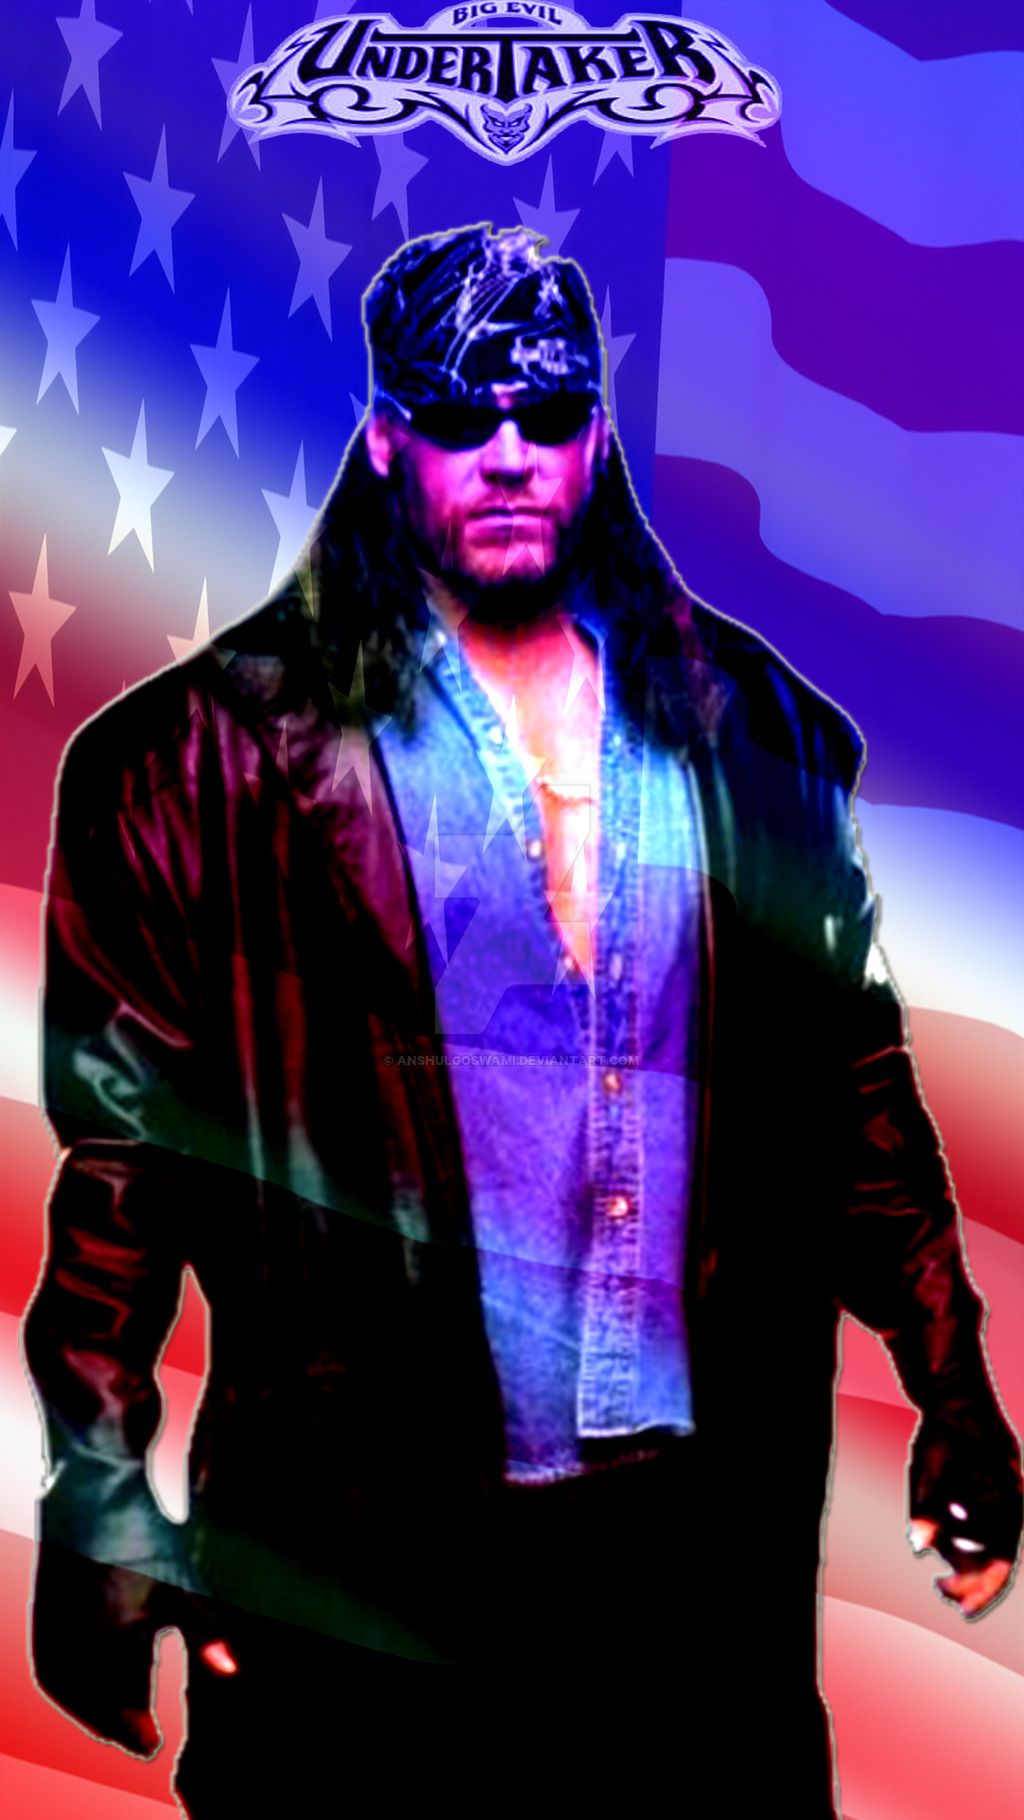 Free download AMERICAN BADASS THE UNDERTAKER poster